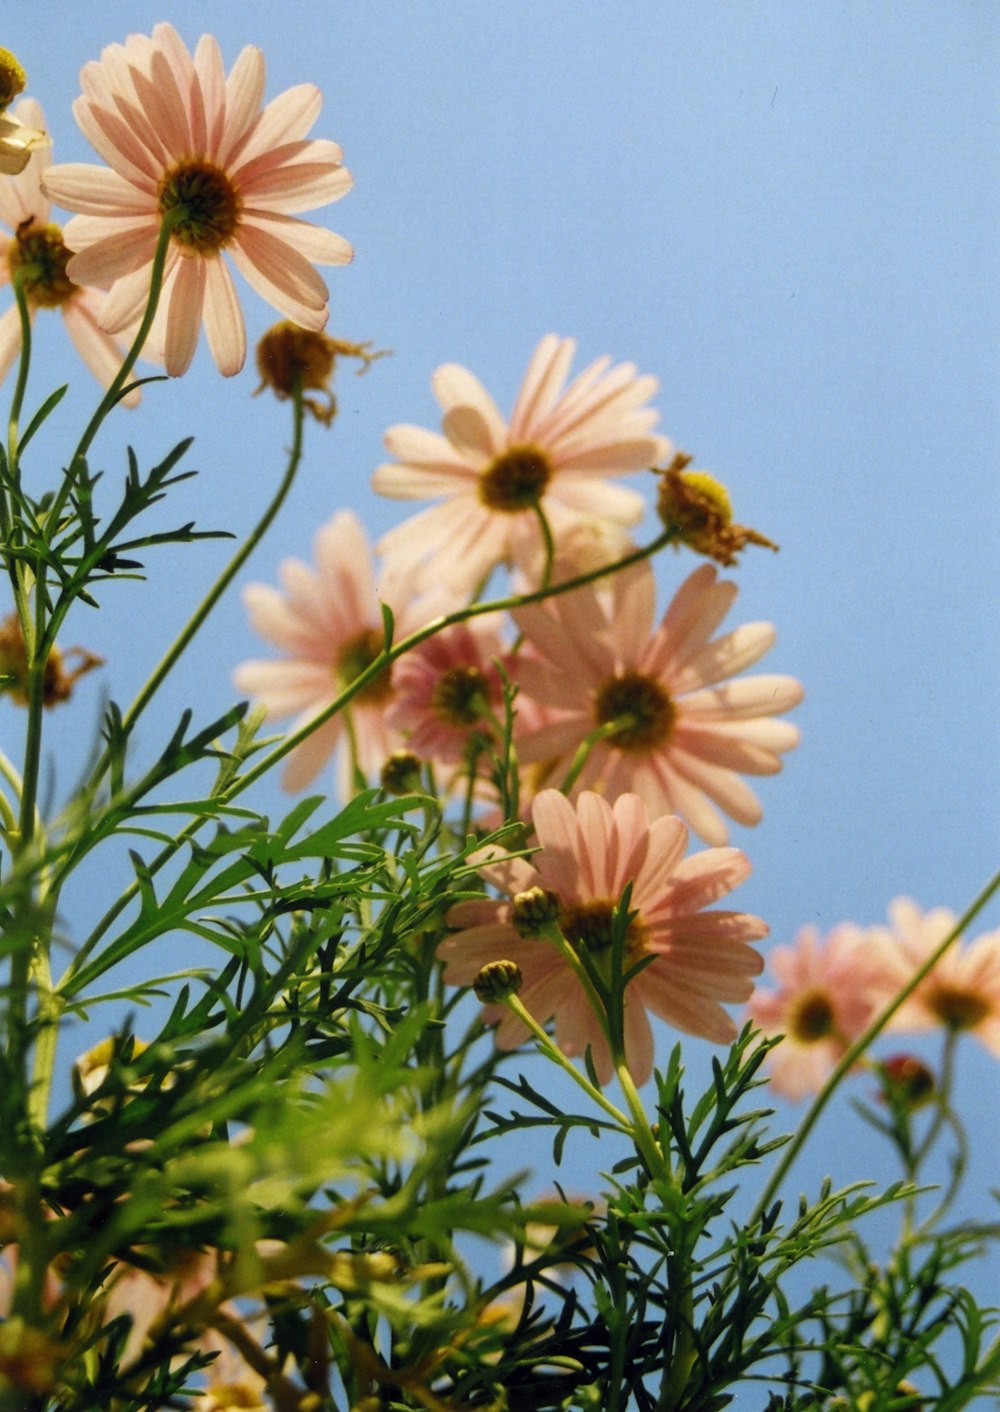 shallow focus photo of pink daisy flowers